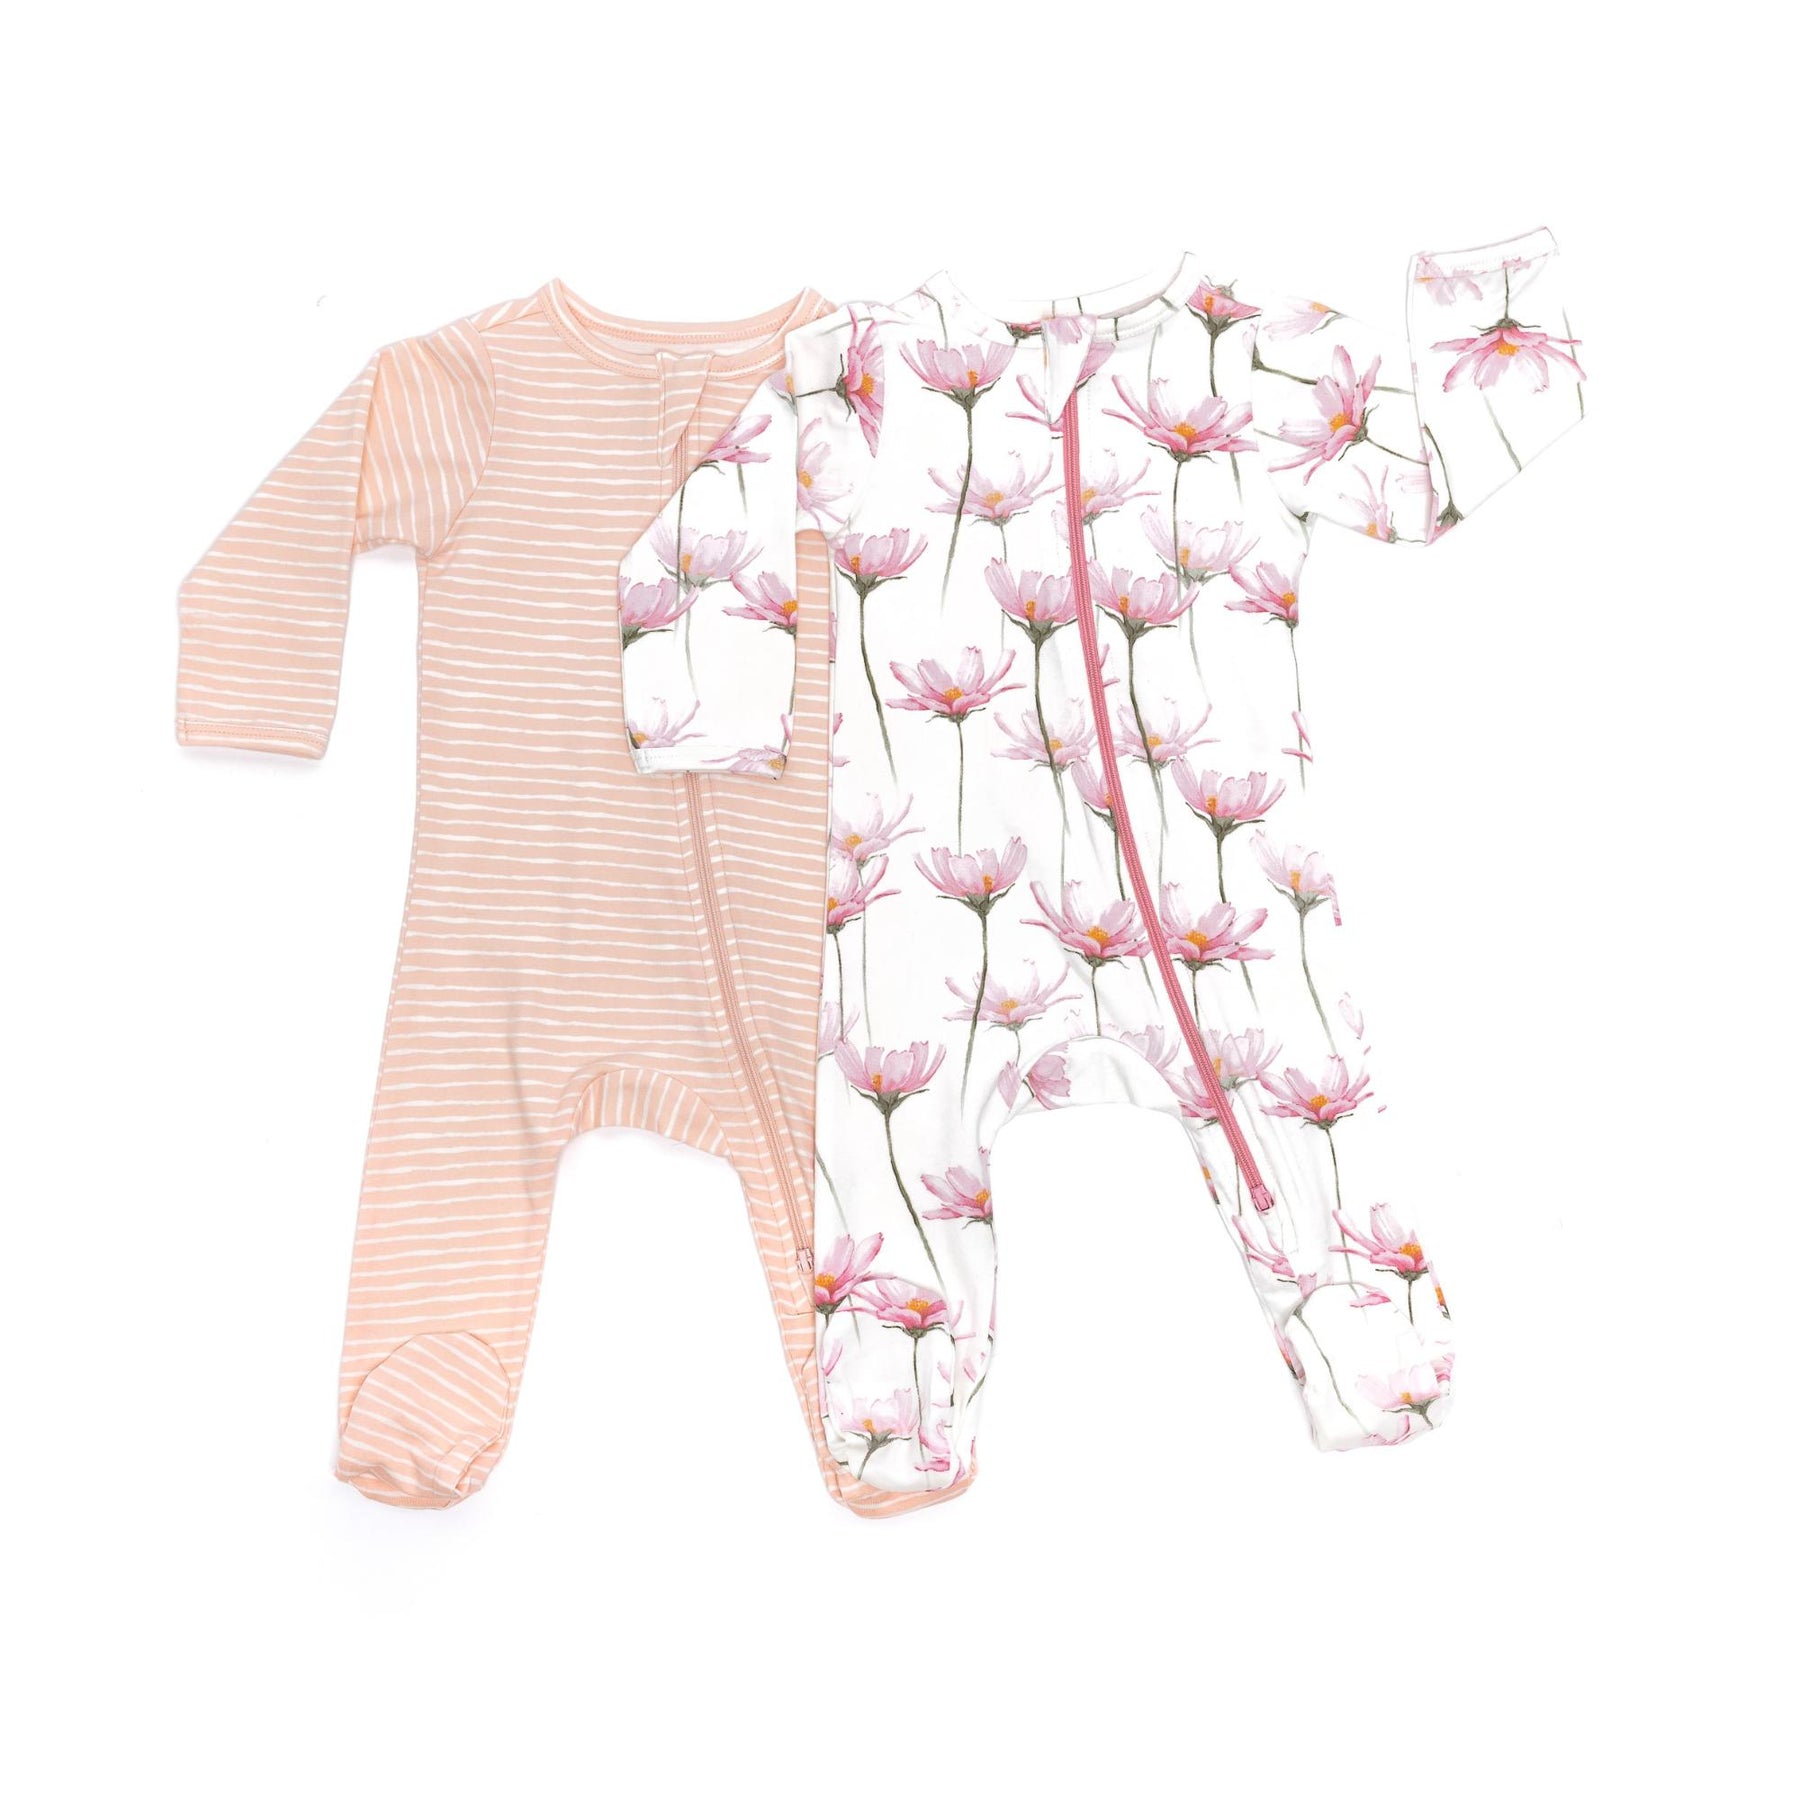 Norani Baby Footed ZIpper Onesie in Pink and White Petal Flowers